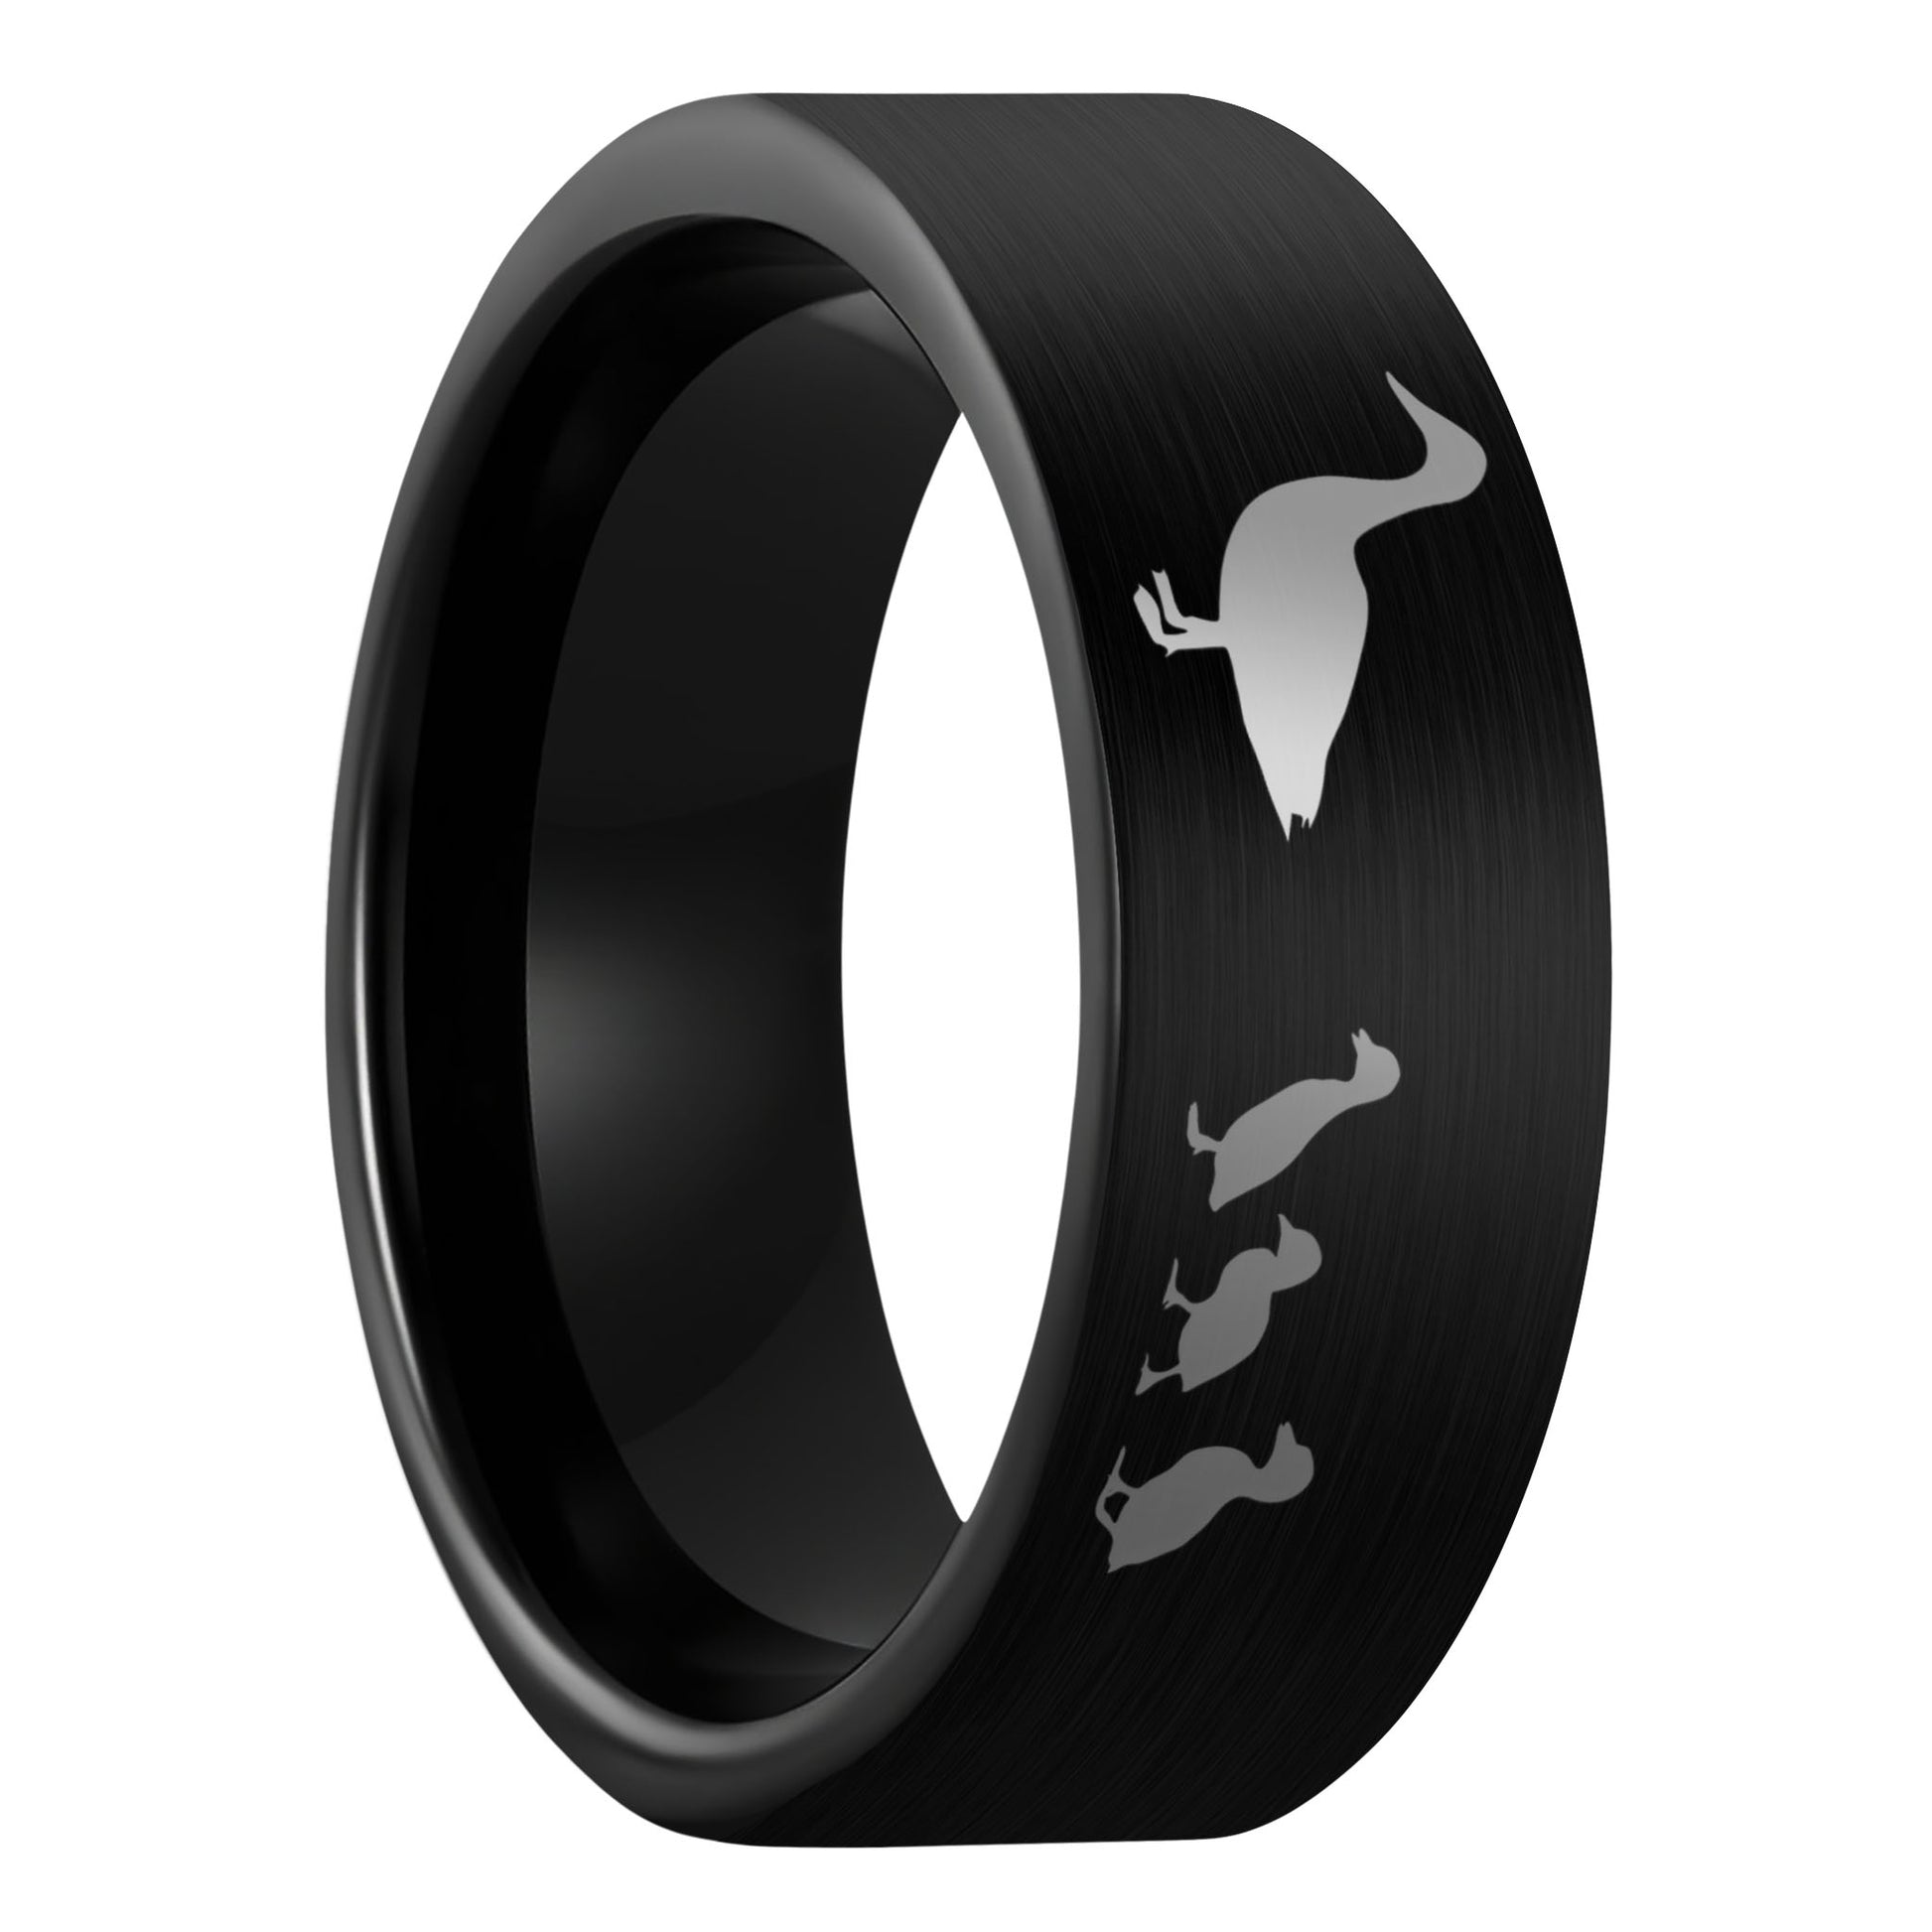 A duck ducklings brushed black tungsten men's wedding band displayed on a plain white background.